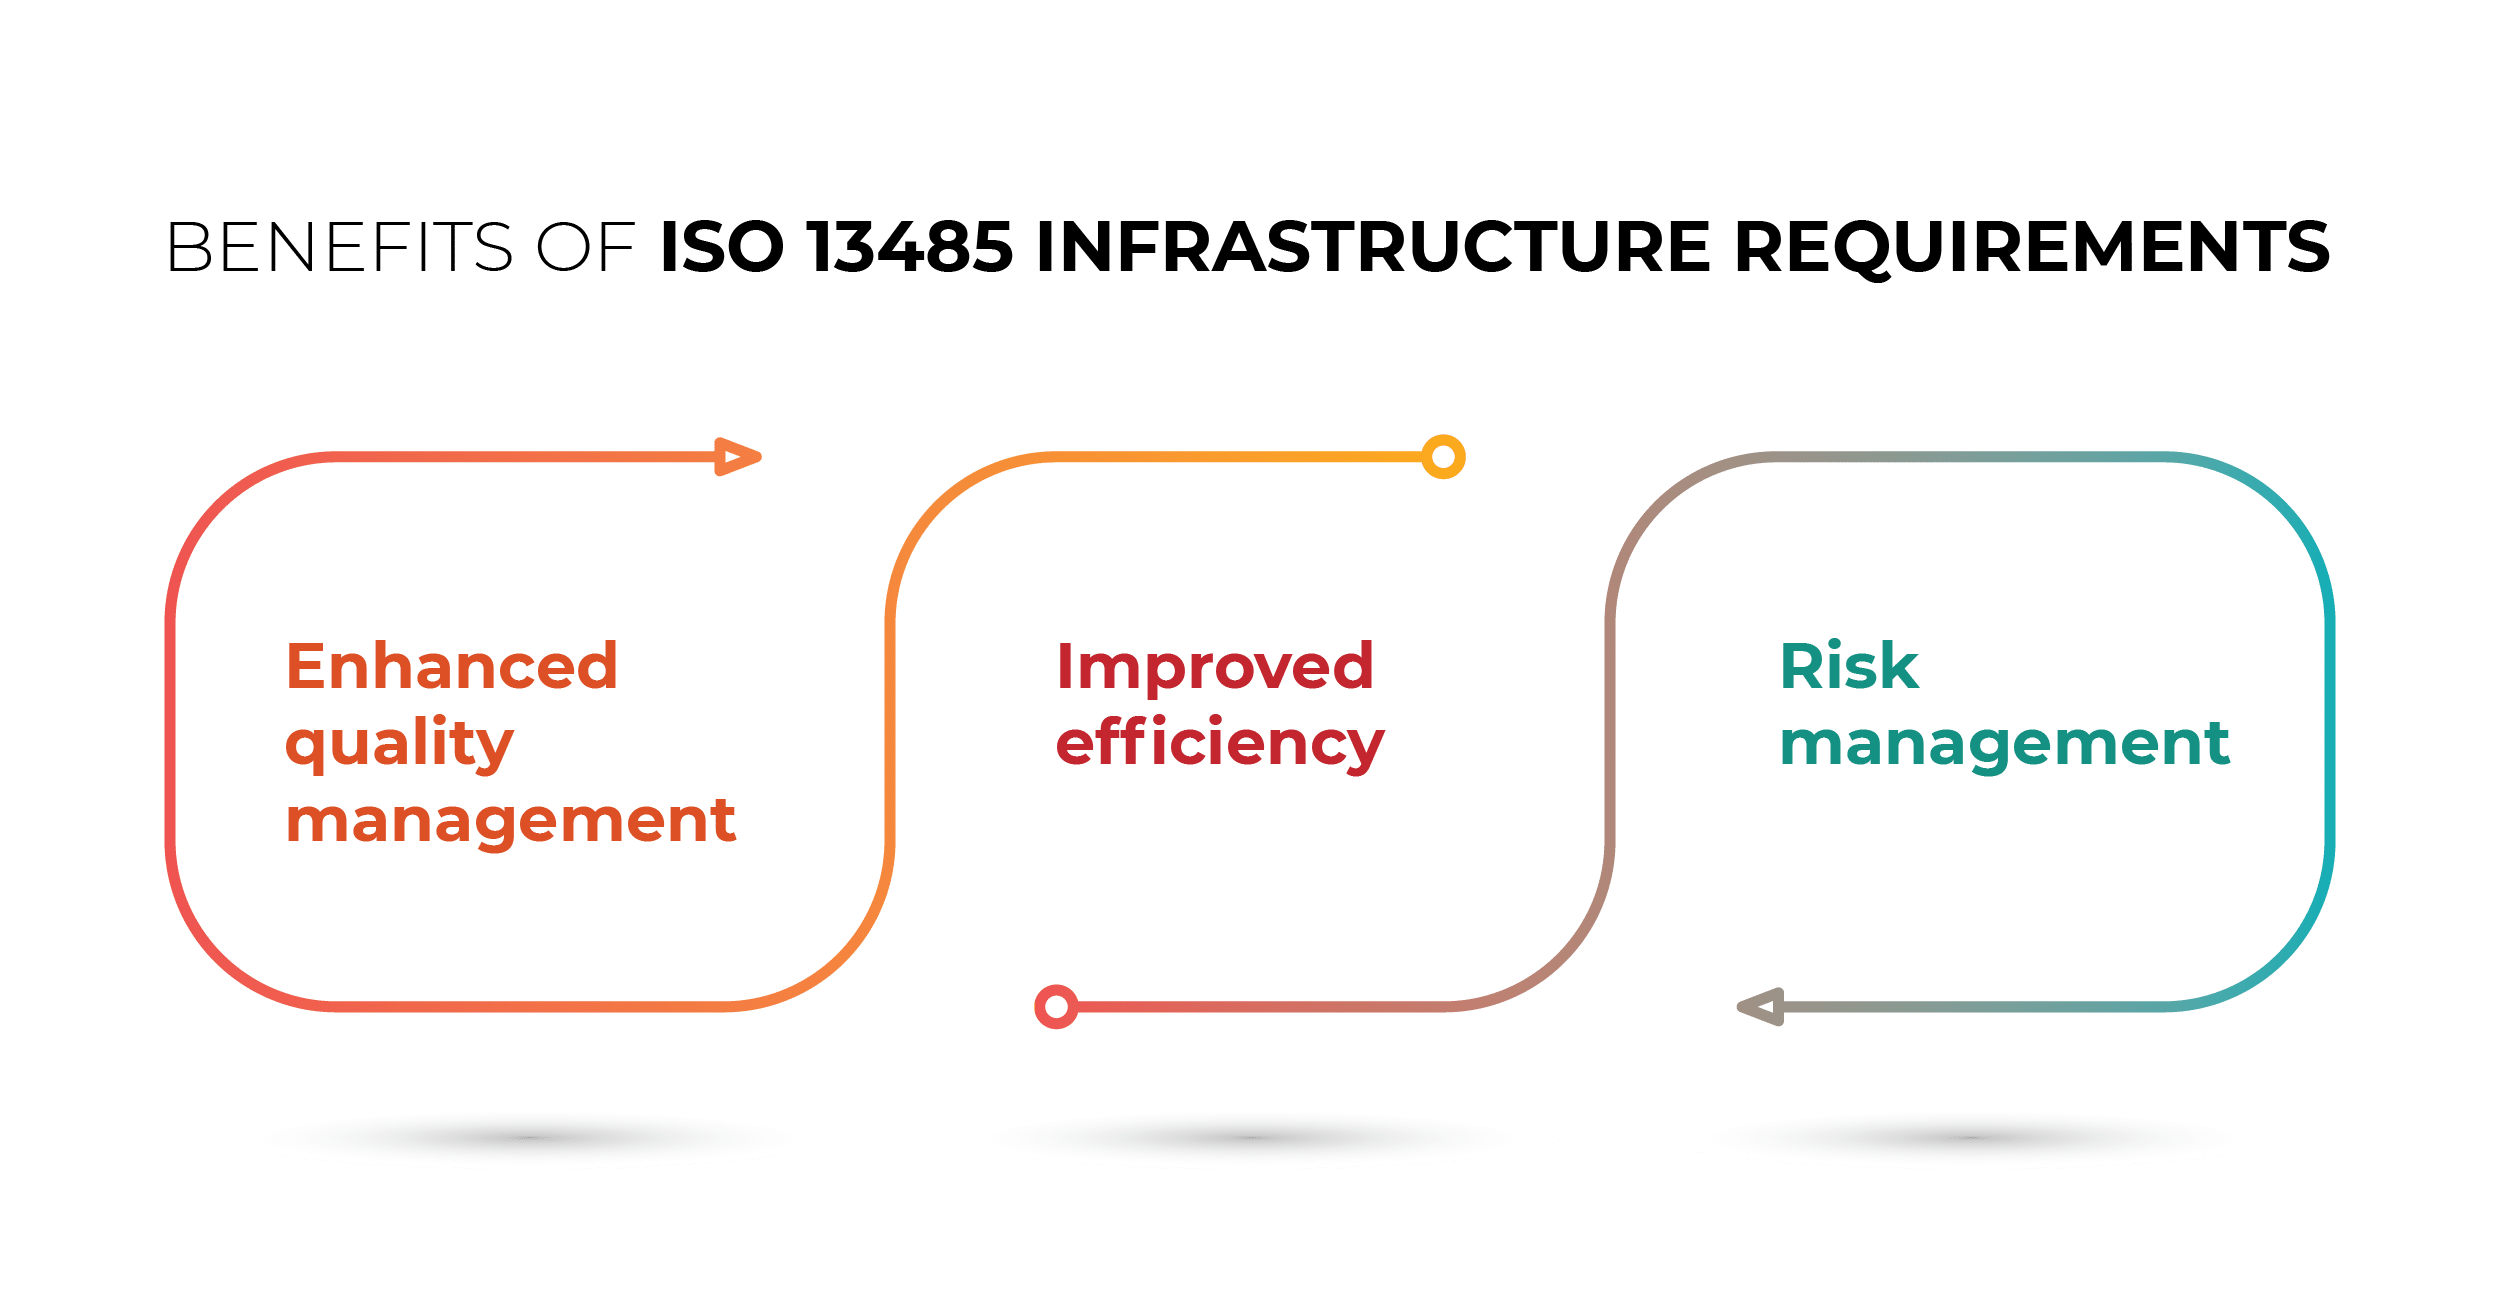 Benefits of ISO 13485 infrastructure requirements